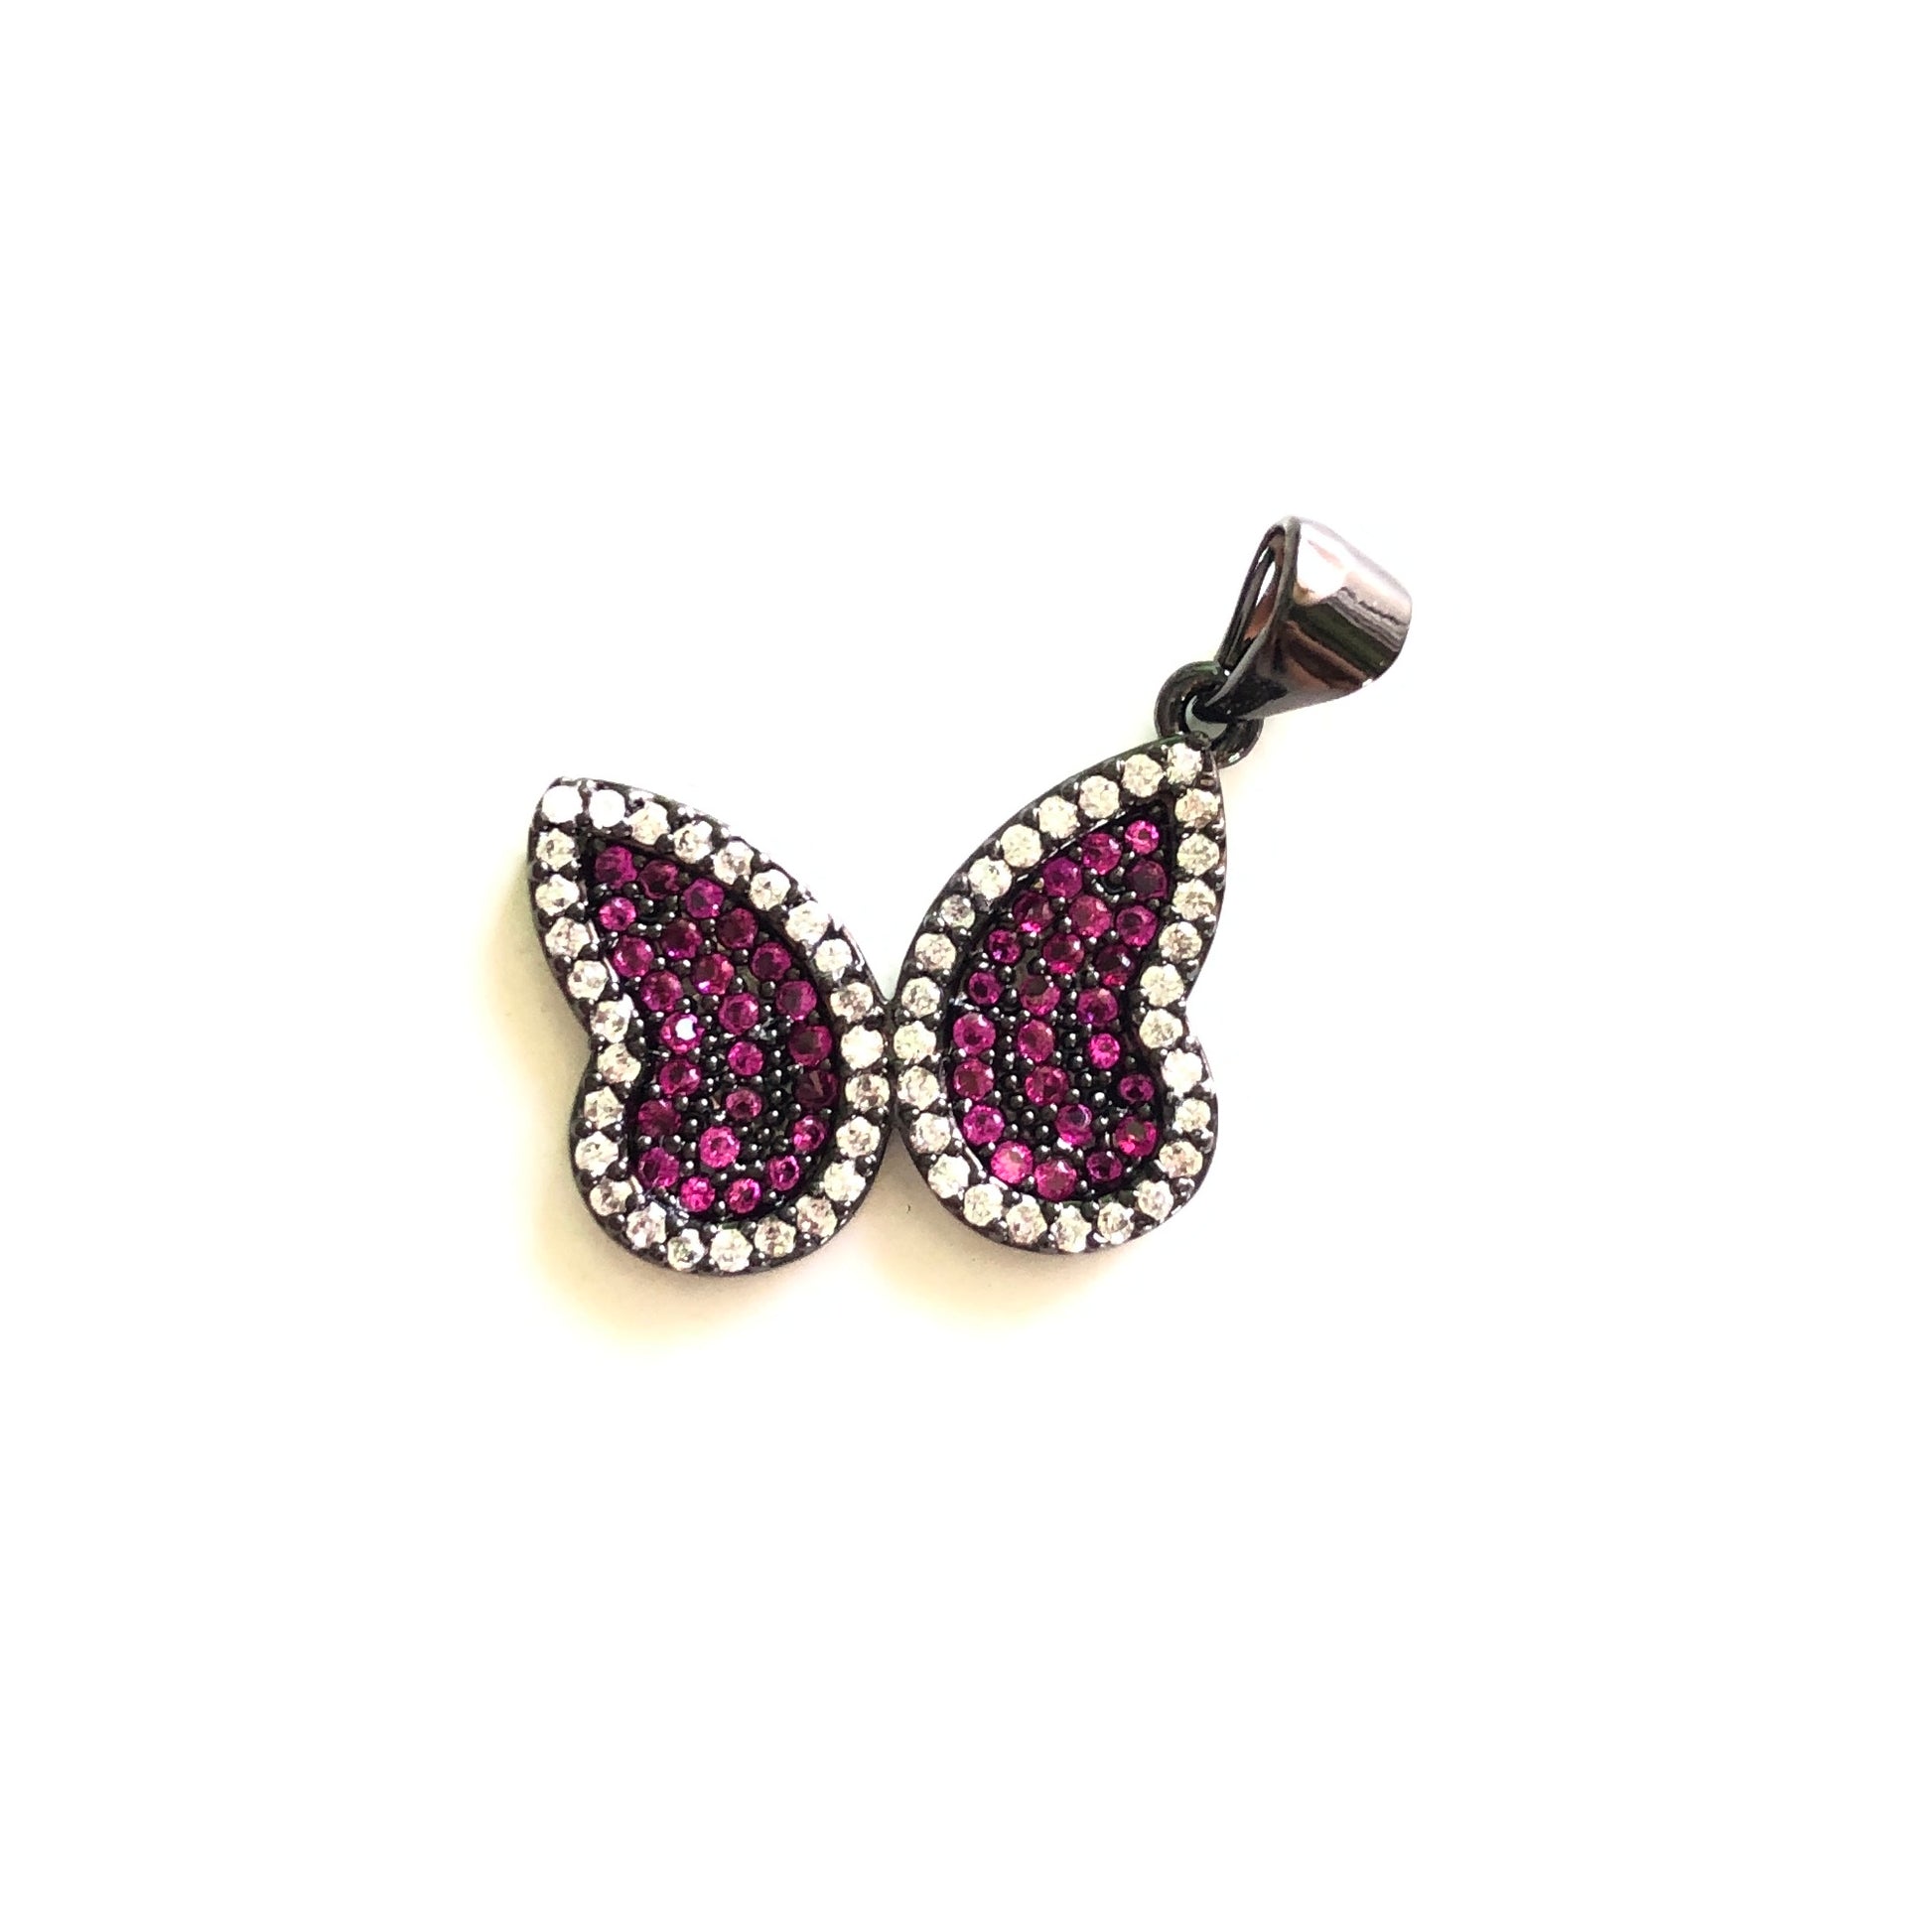 5pcs/lot 21*15mm Colorful CZ Paved Butterfly Charms Fuchsia on Black CZ Paved Charms Butterflies Charms Beads Beyond